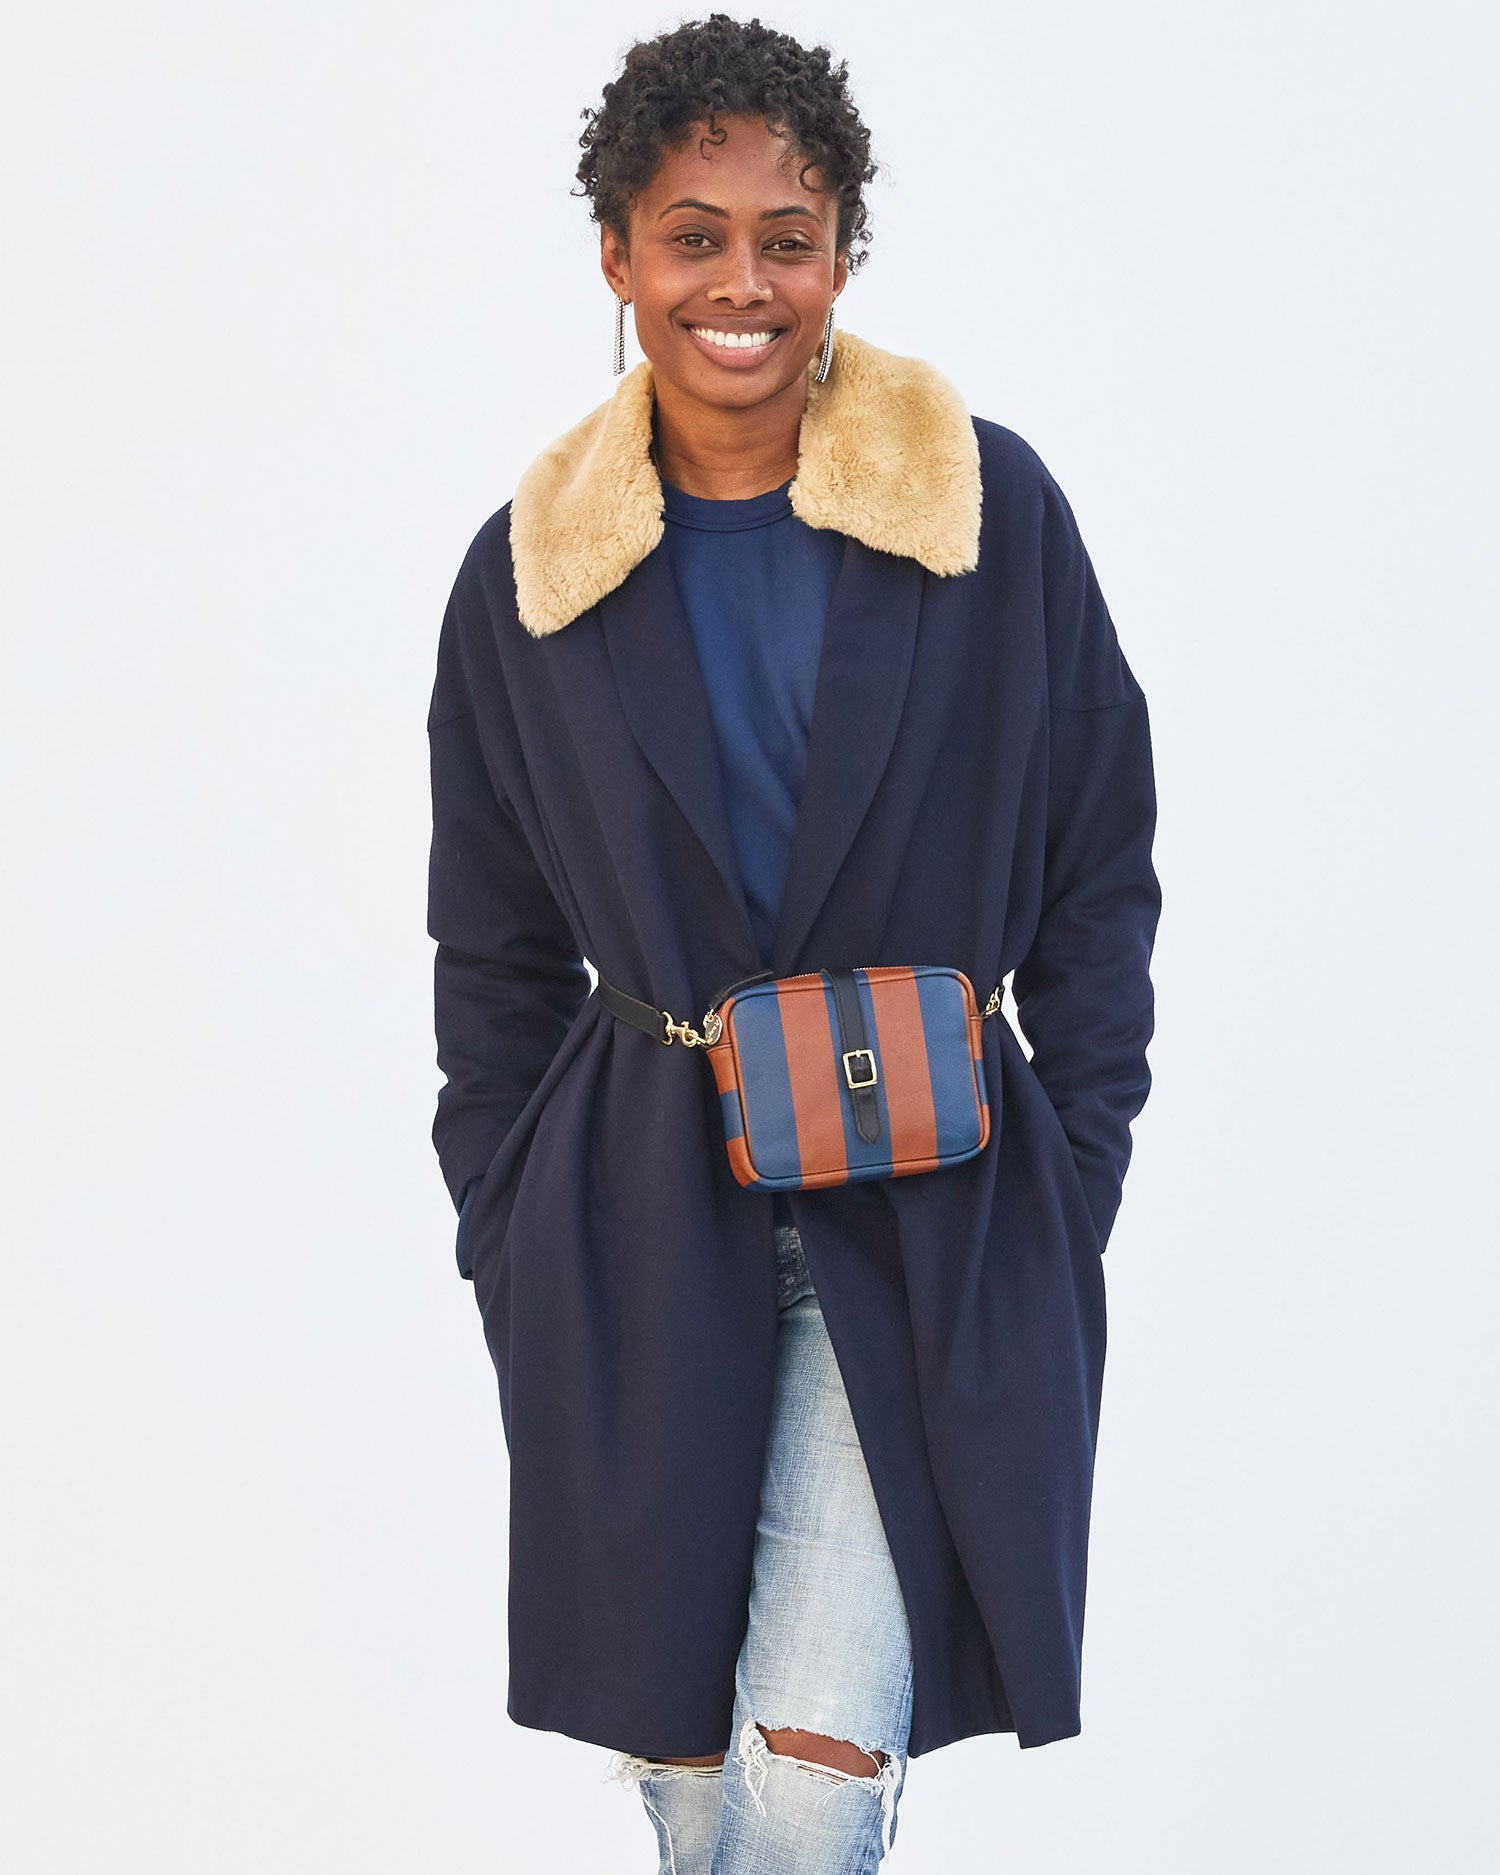 Mecca wearing the Cognac & Pacific Striped Gigi around her waist over a navy coat